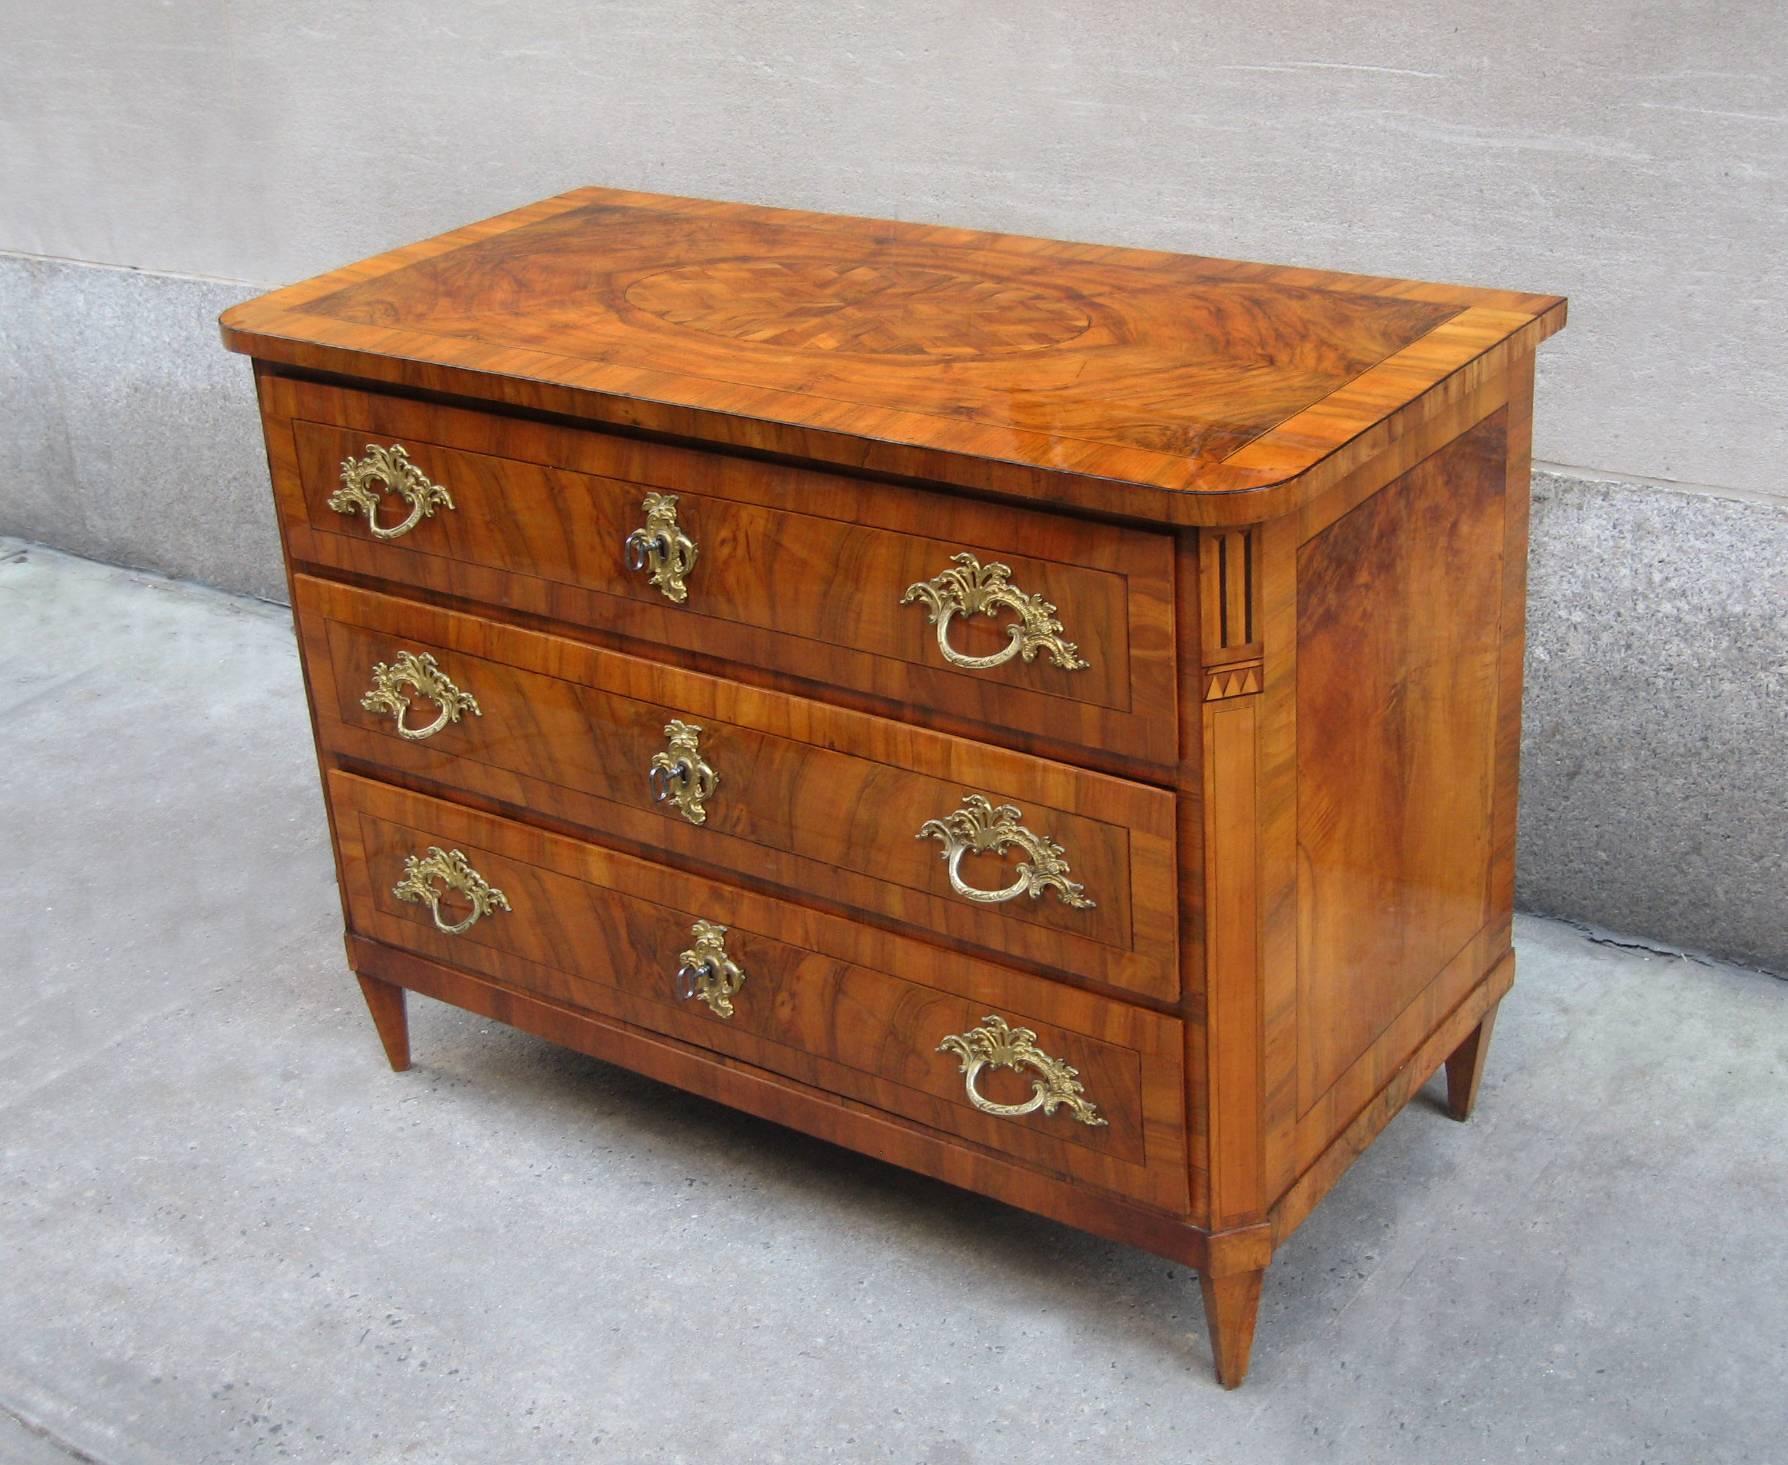 A fine Louis XVI period chest with three drawers from Dresden, Germany circa 1780. The top, front and sides feature walnut and walnut burl enhanced with an oval marquetry medallion on the top, ebony and fruitwood inlay on the square canted corners